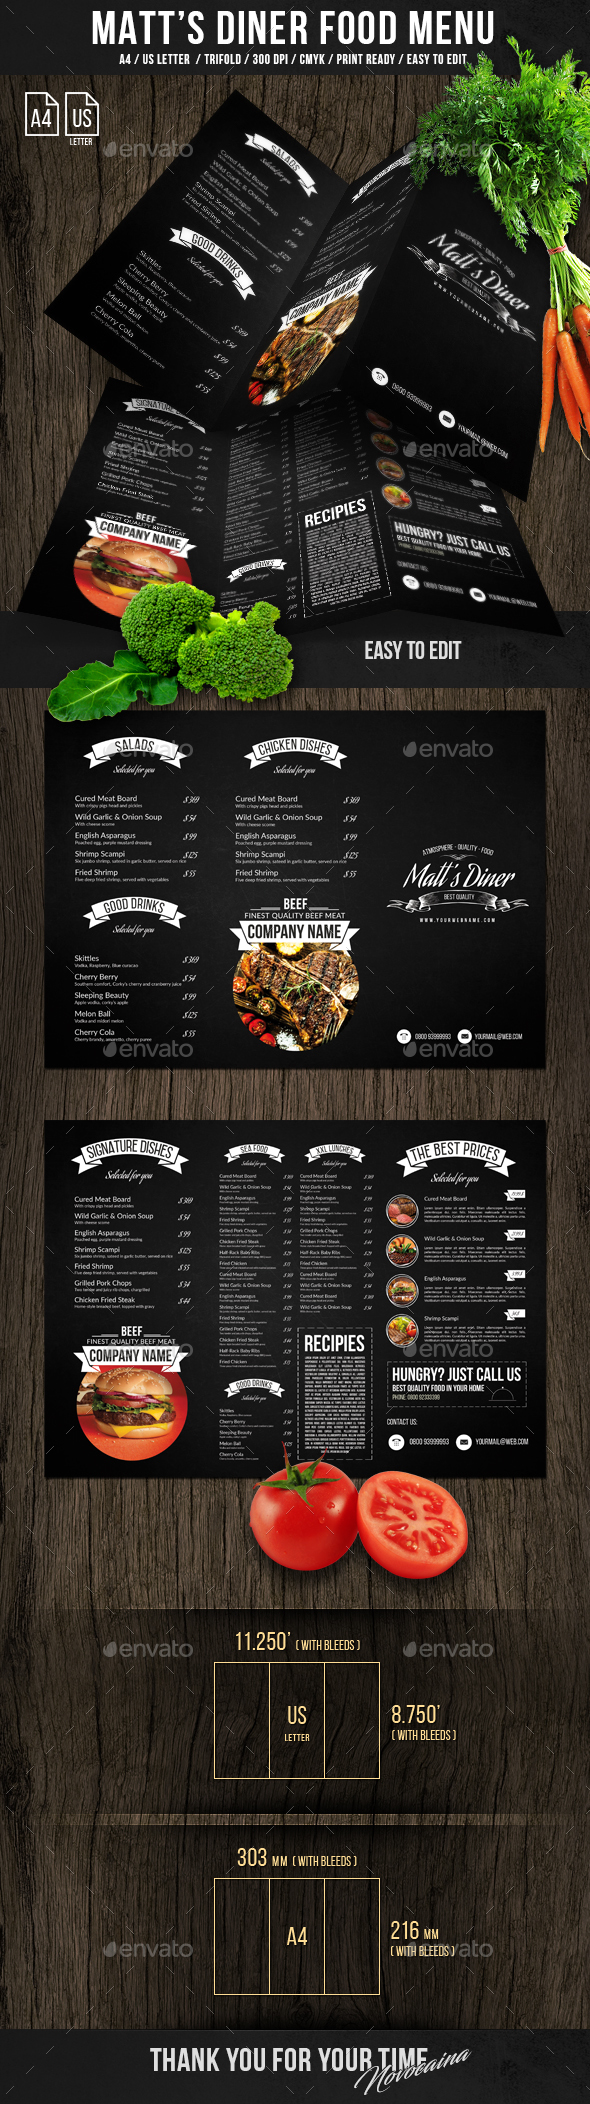  Matt's Diner Trifold A4 and US Letter Menu 